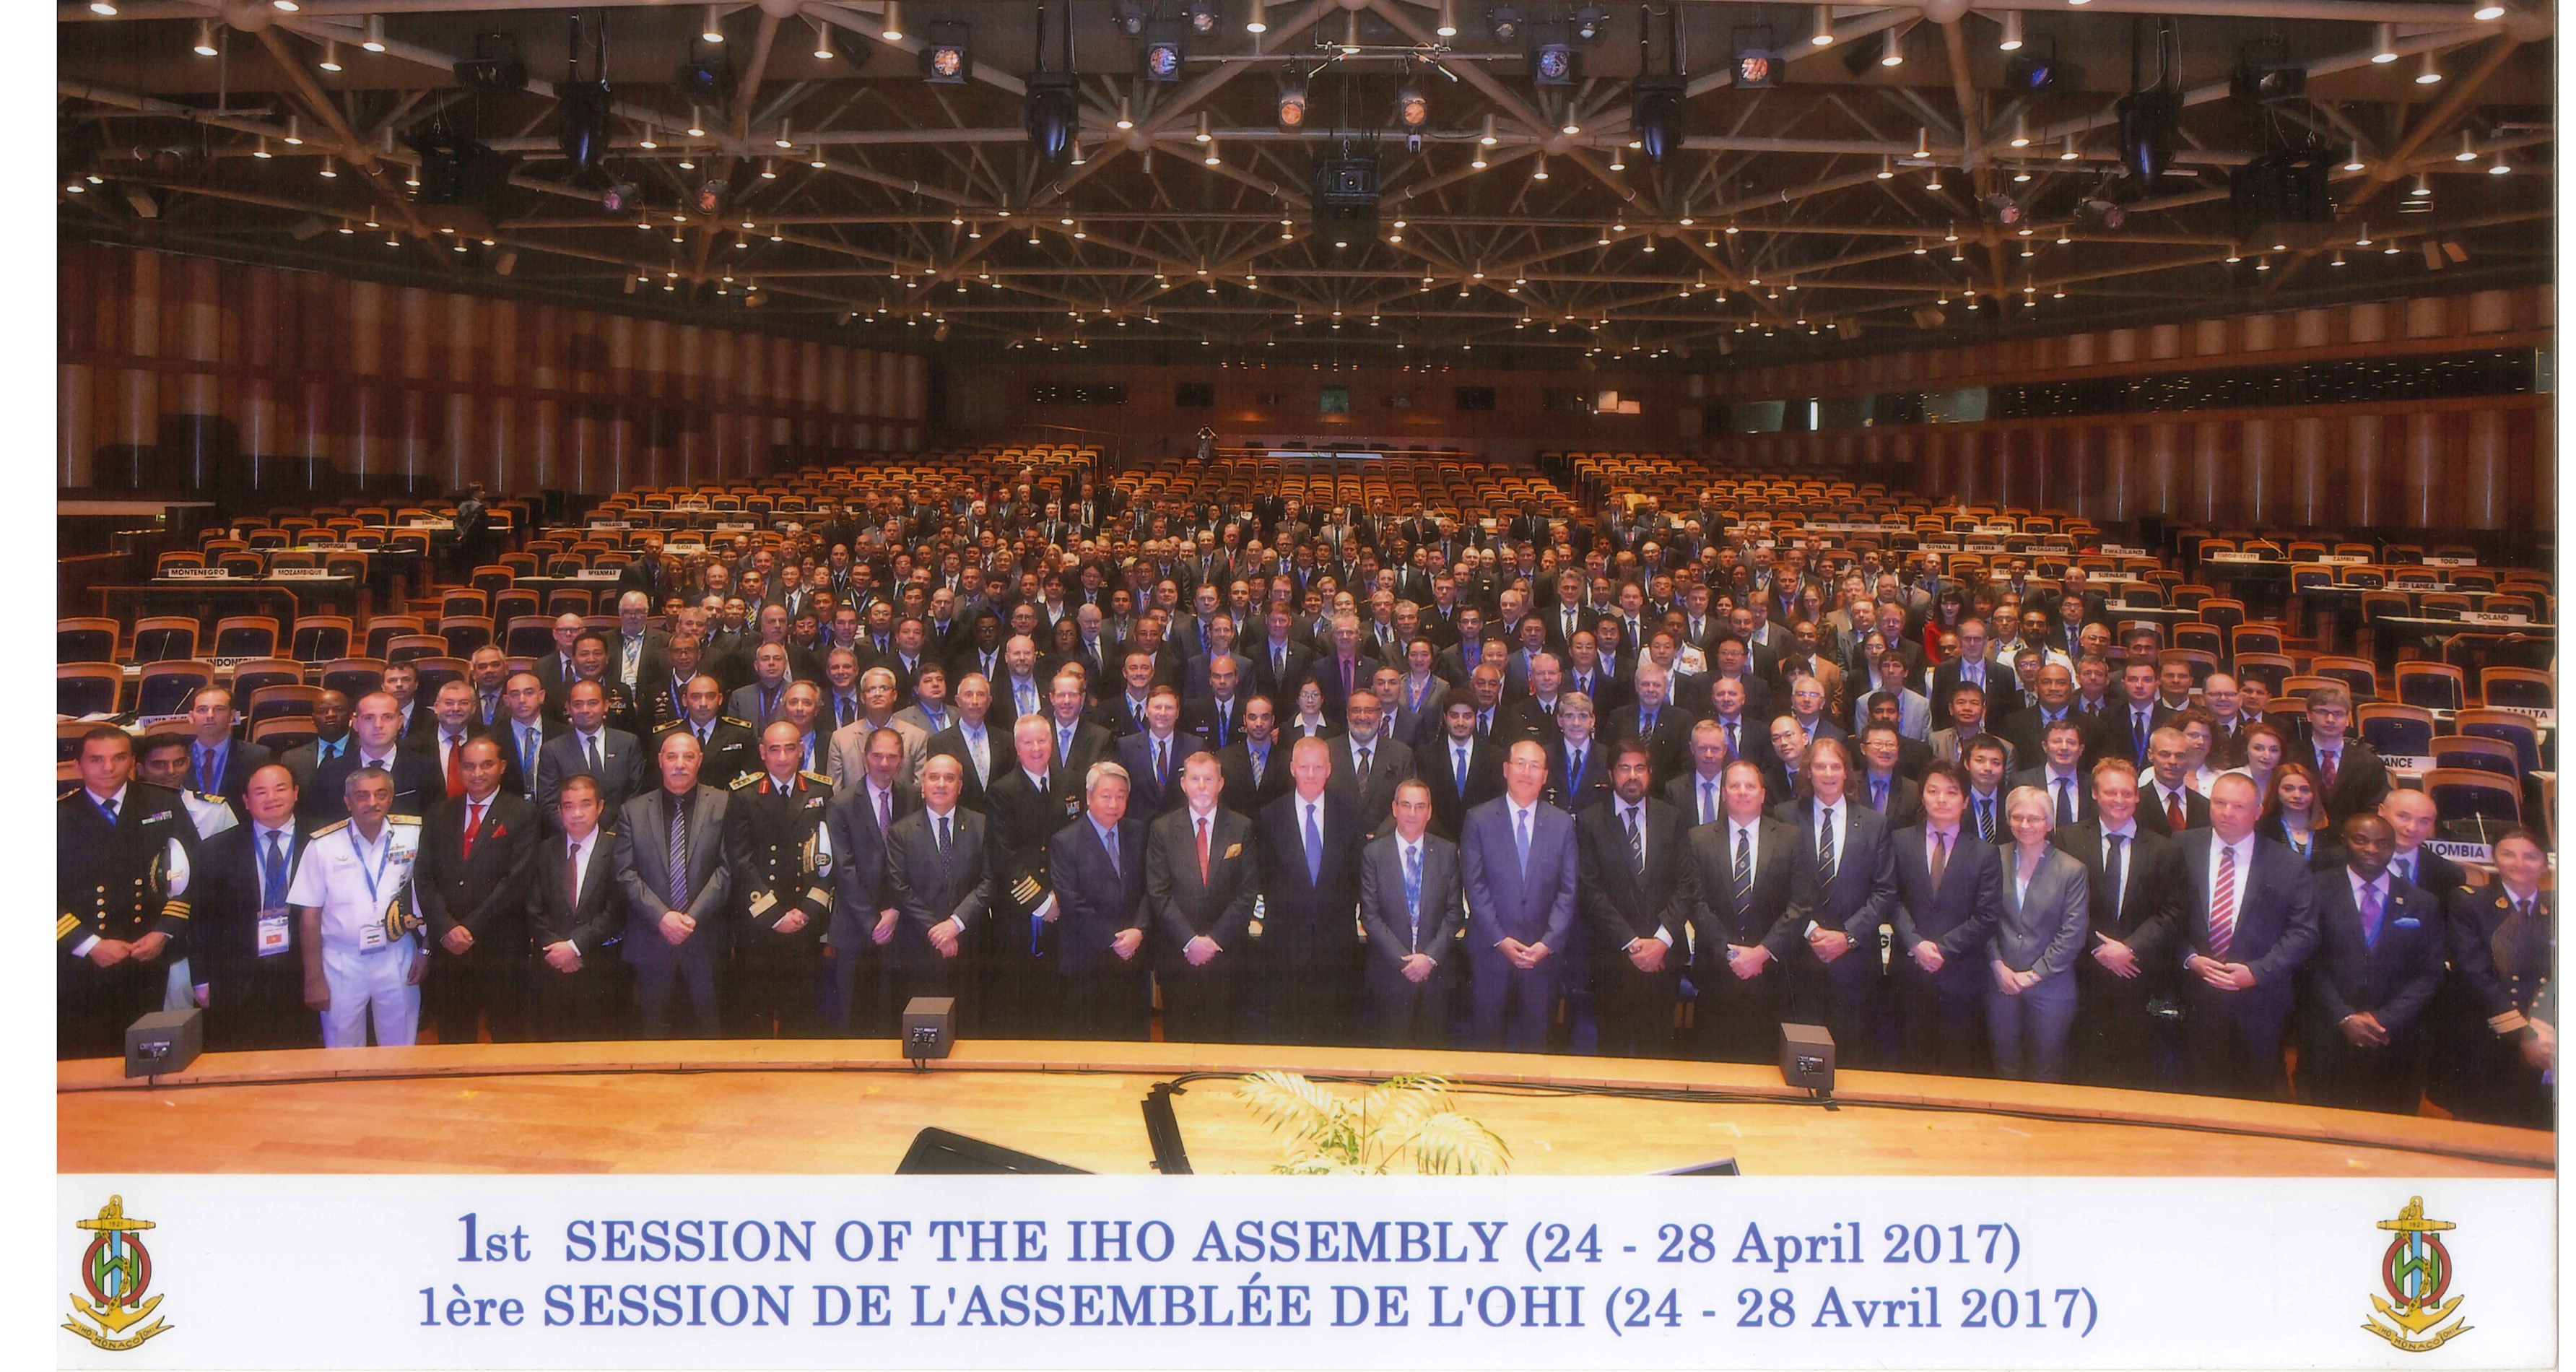 IHO Assembly in 2017